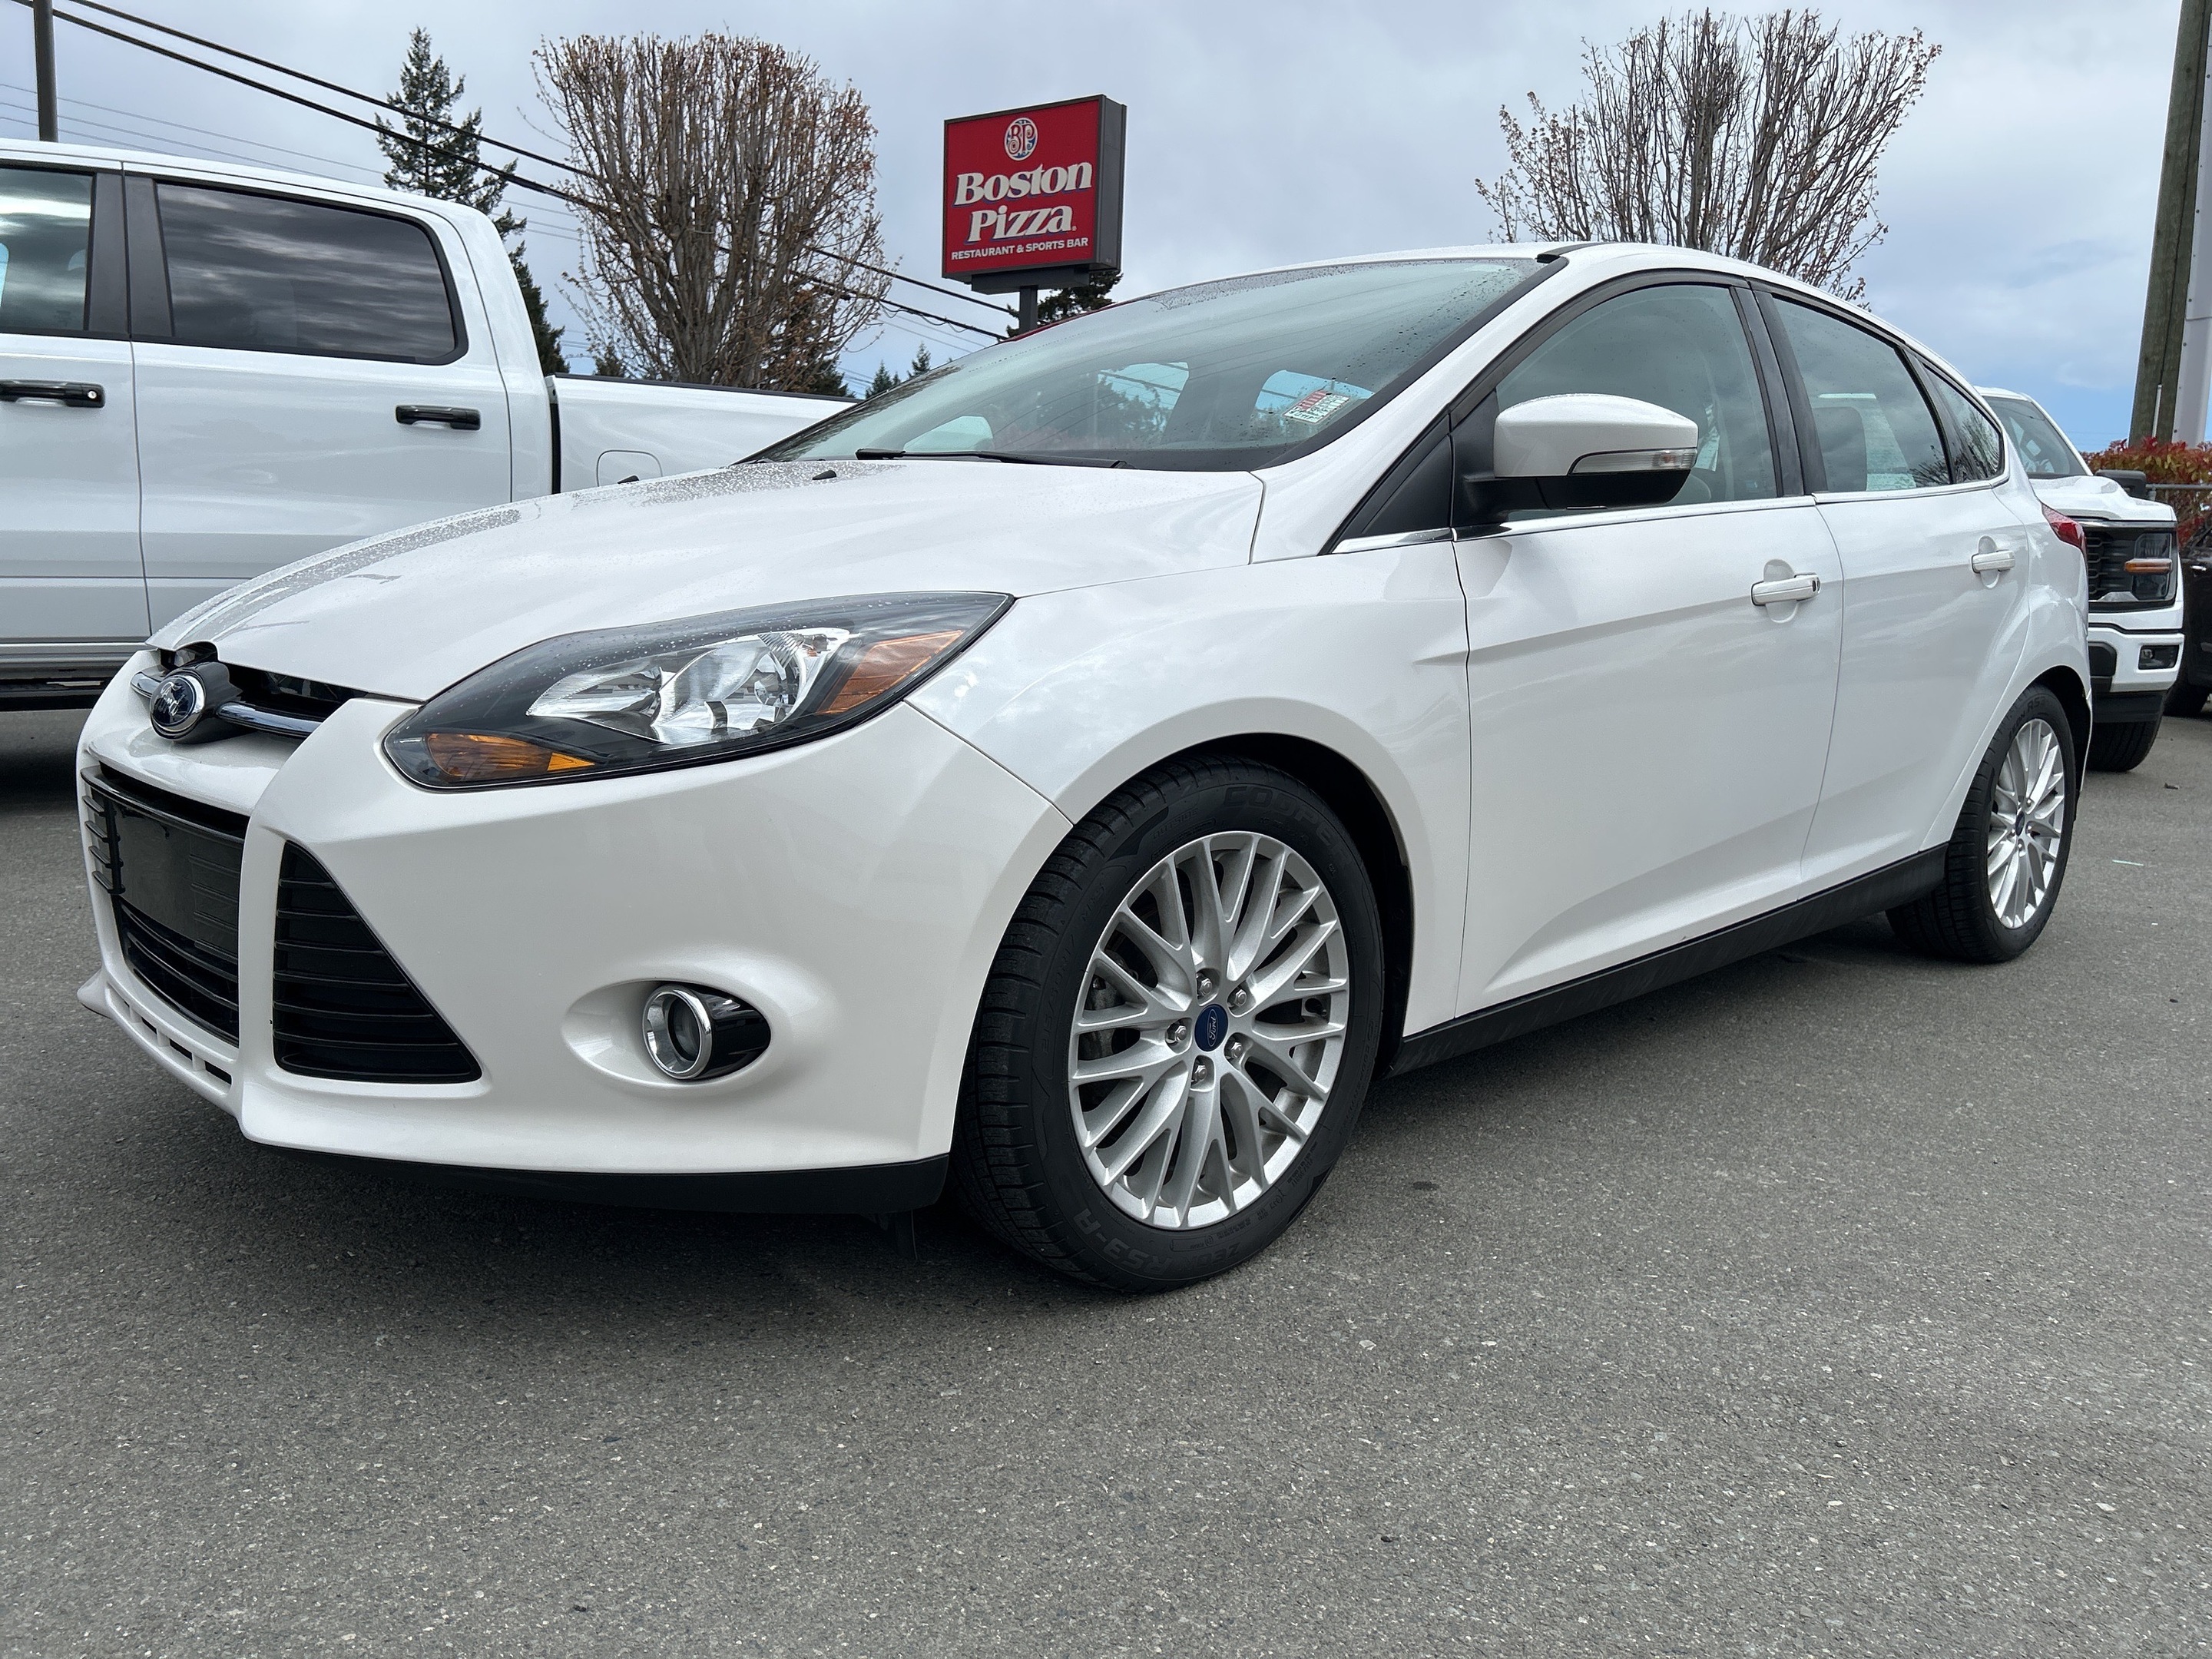 2014 Ford Focus 2.0L | Moonroof | Leather |Navigation | Sunroof